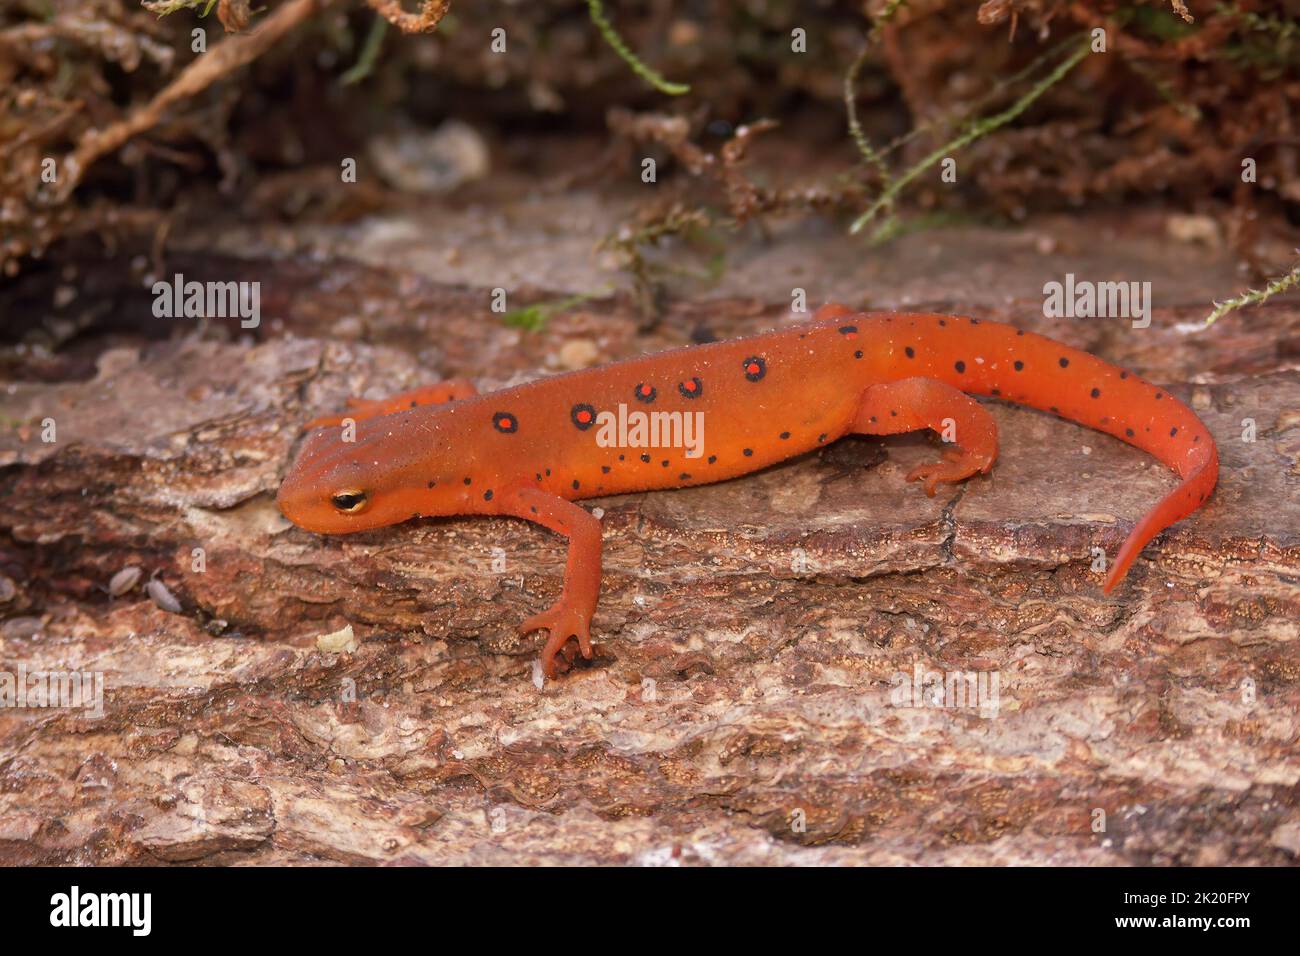 Full body closeup on a colorful red eft stage juvenile Red-spotted newt Notophthalmus viridescens sitting on wood Stock Photo